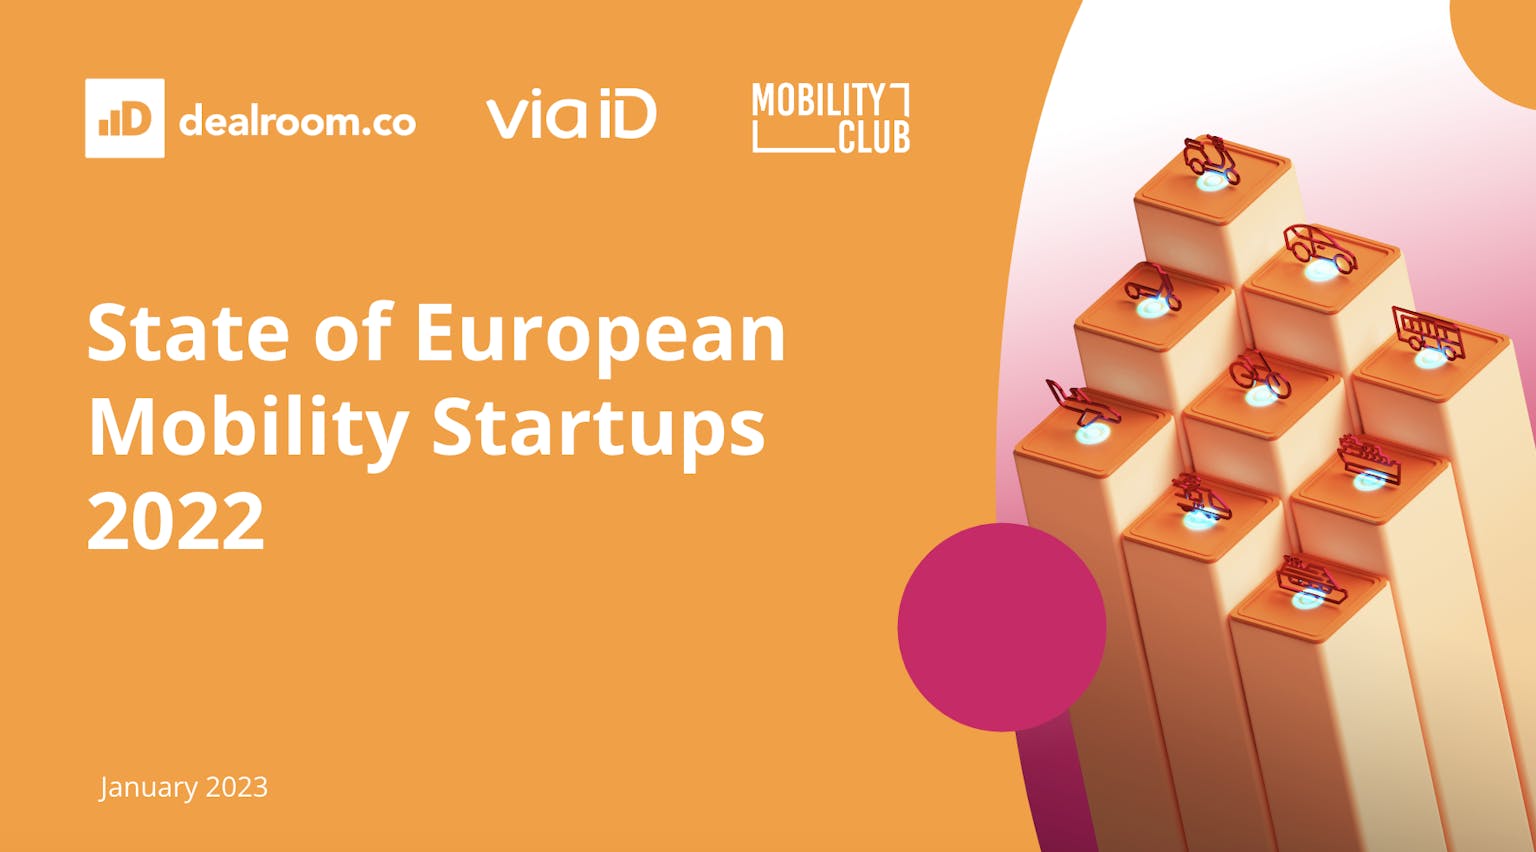 Press start to innovate: 10 European startups levelling up the